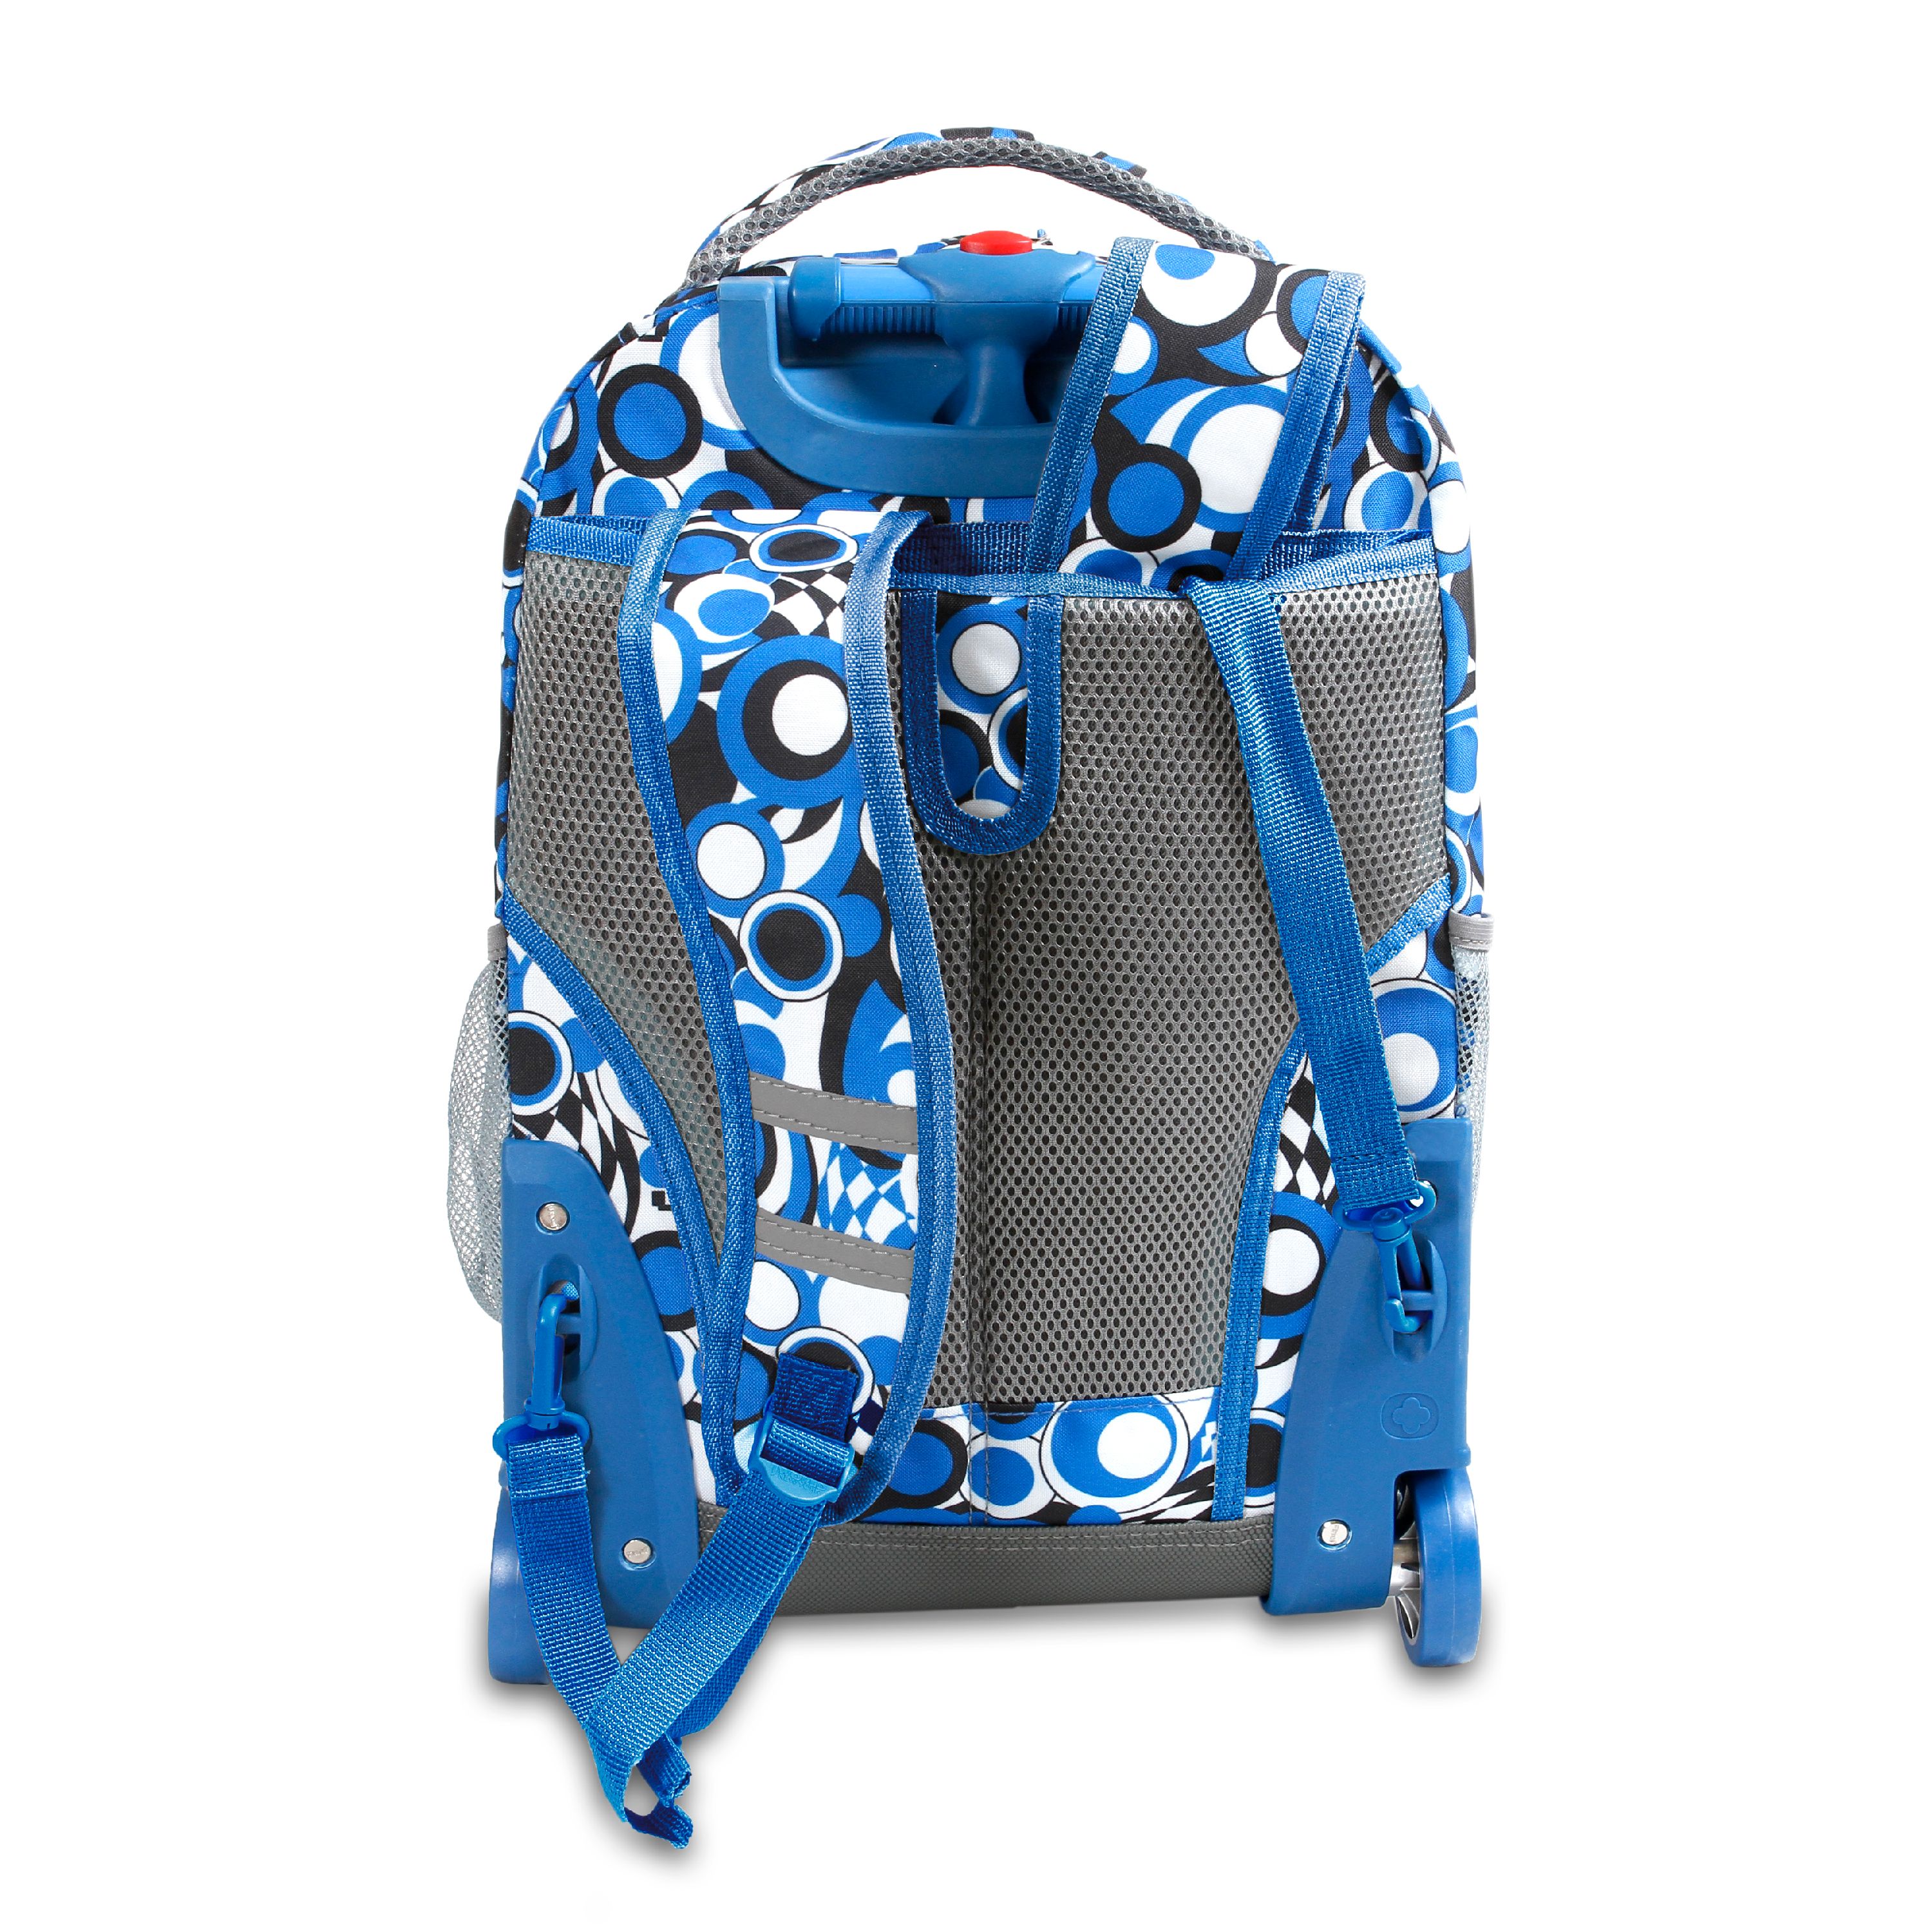 J World Boys And Girls Sunrise 18" Rolling Backpack For School And Travel, Chess Blue - image 2 of 5